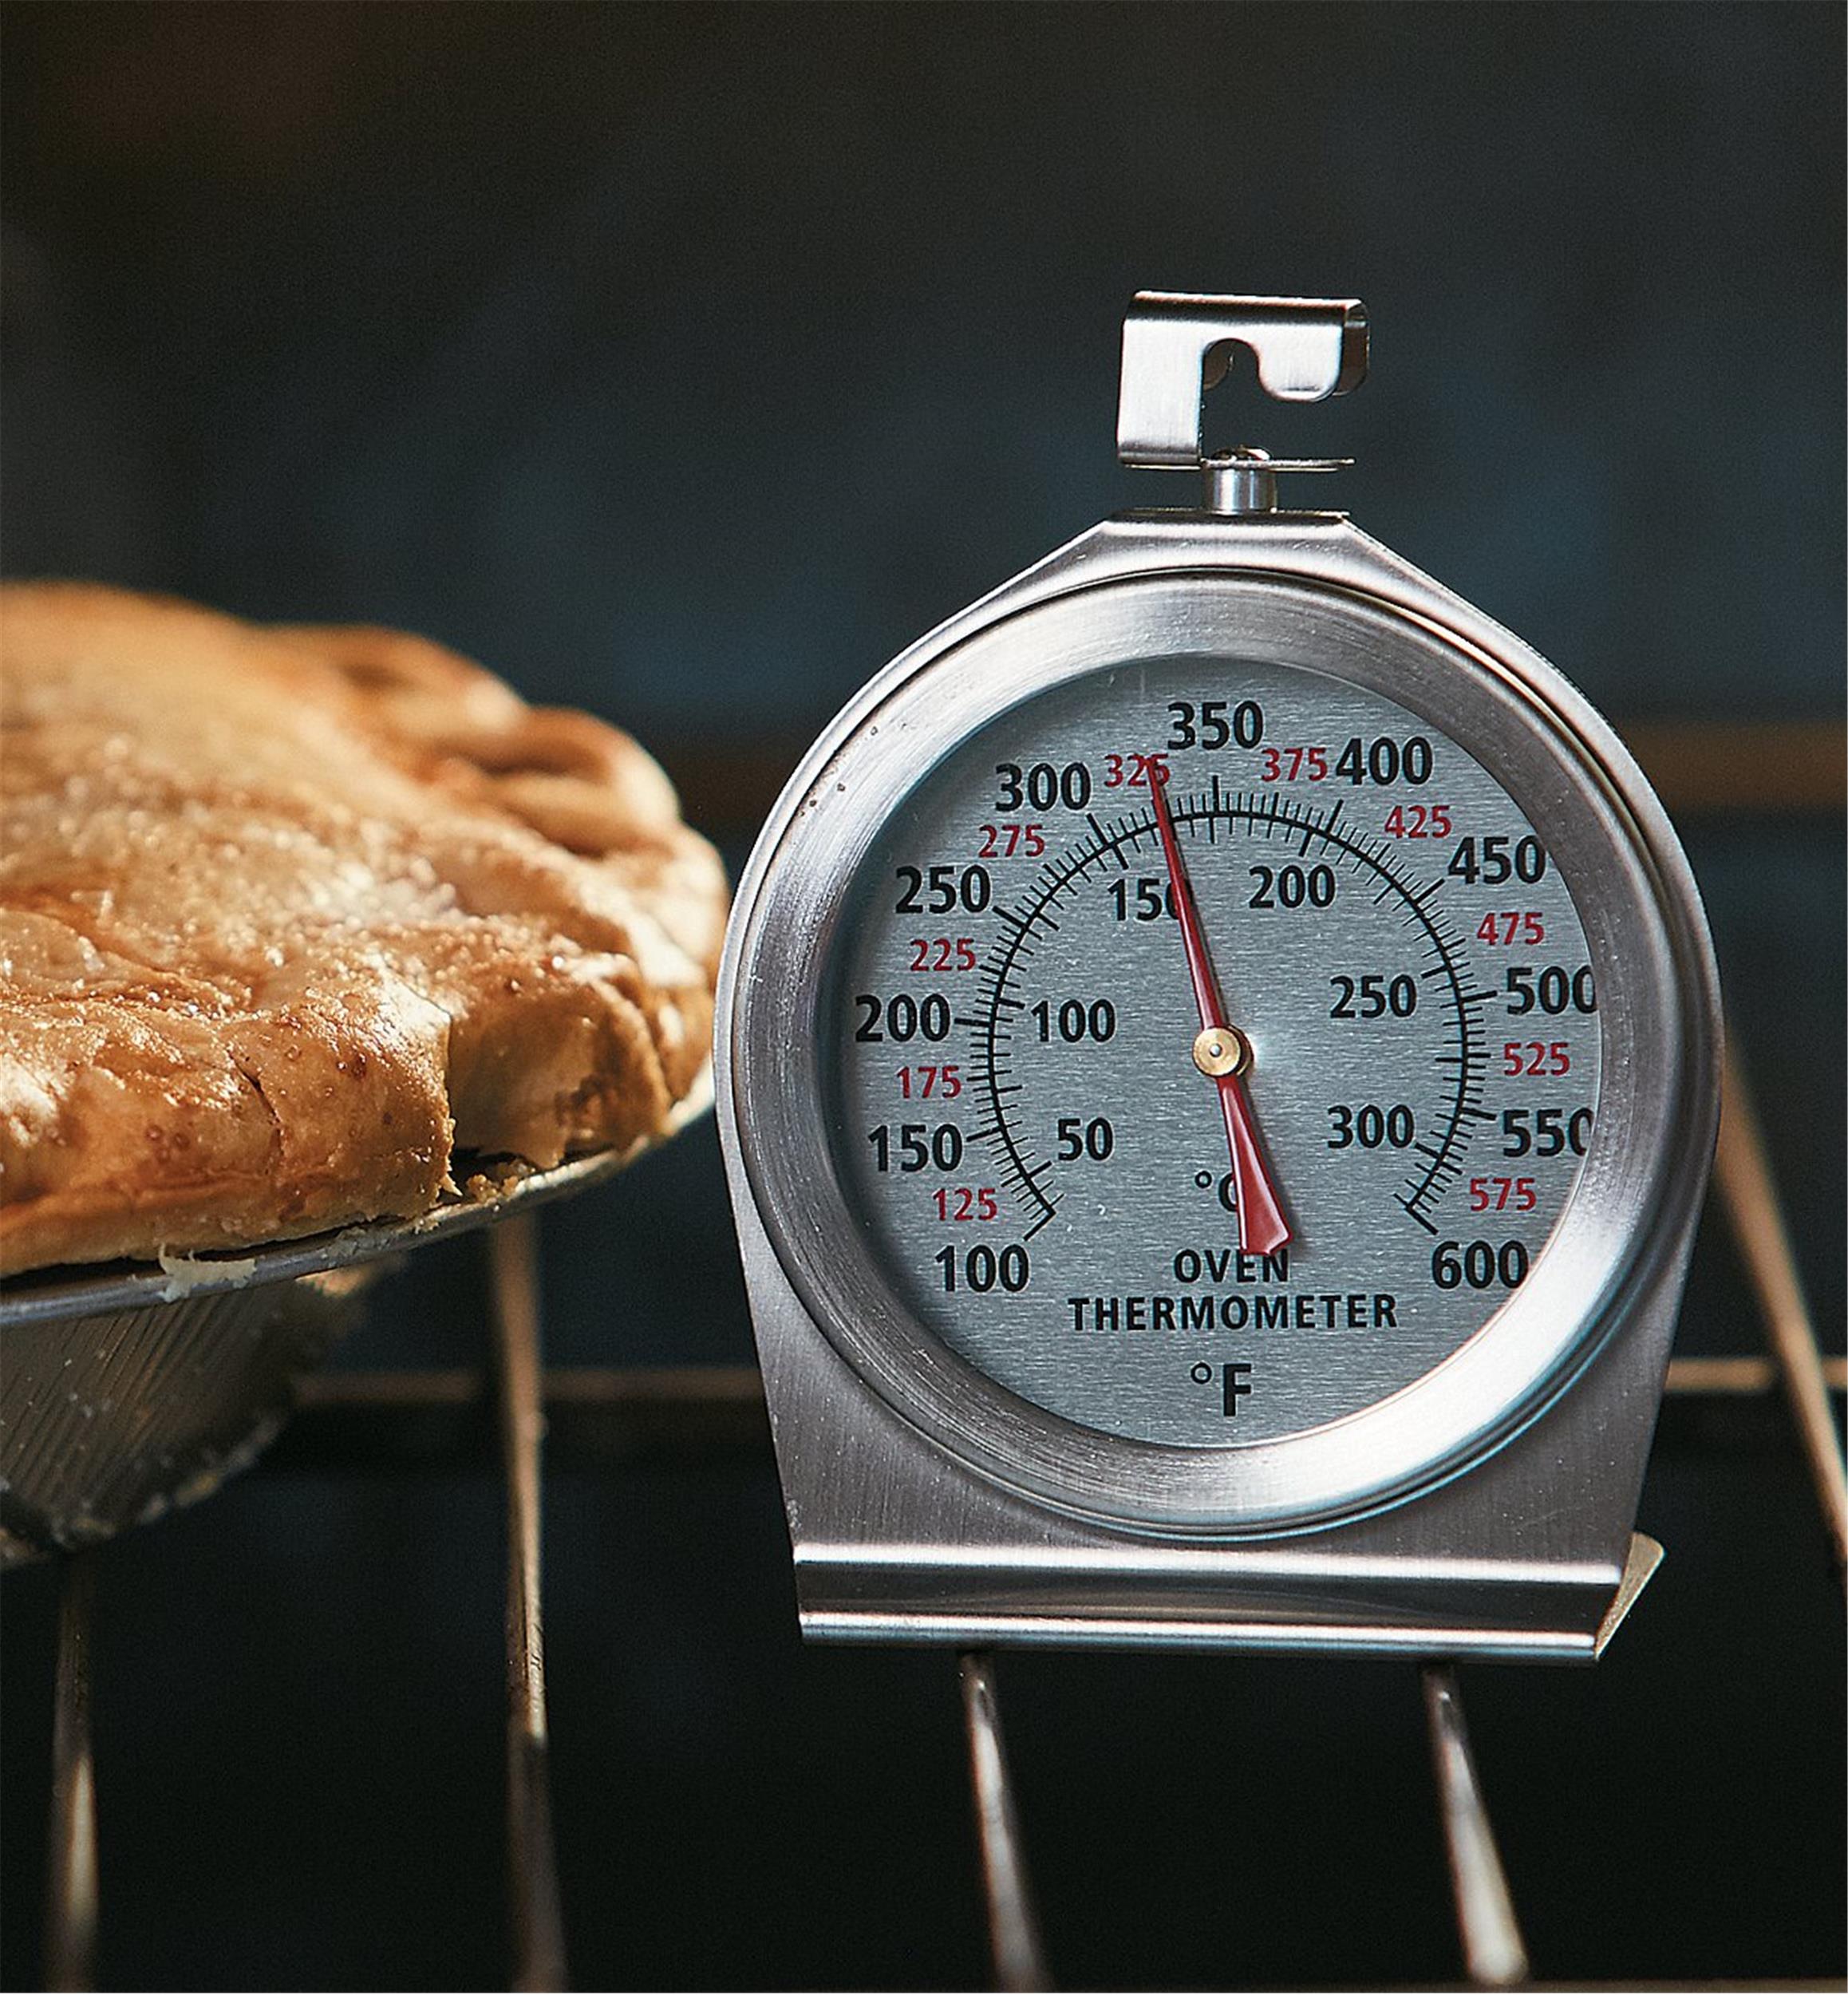 https://assets.leevalley.com/Size5/10063/FT126-oven-thermometer-u-01-r.jpg